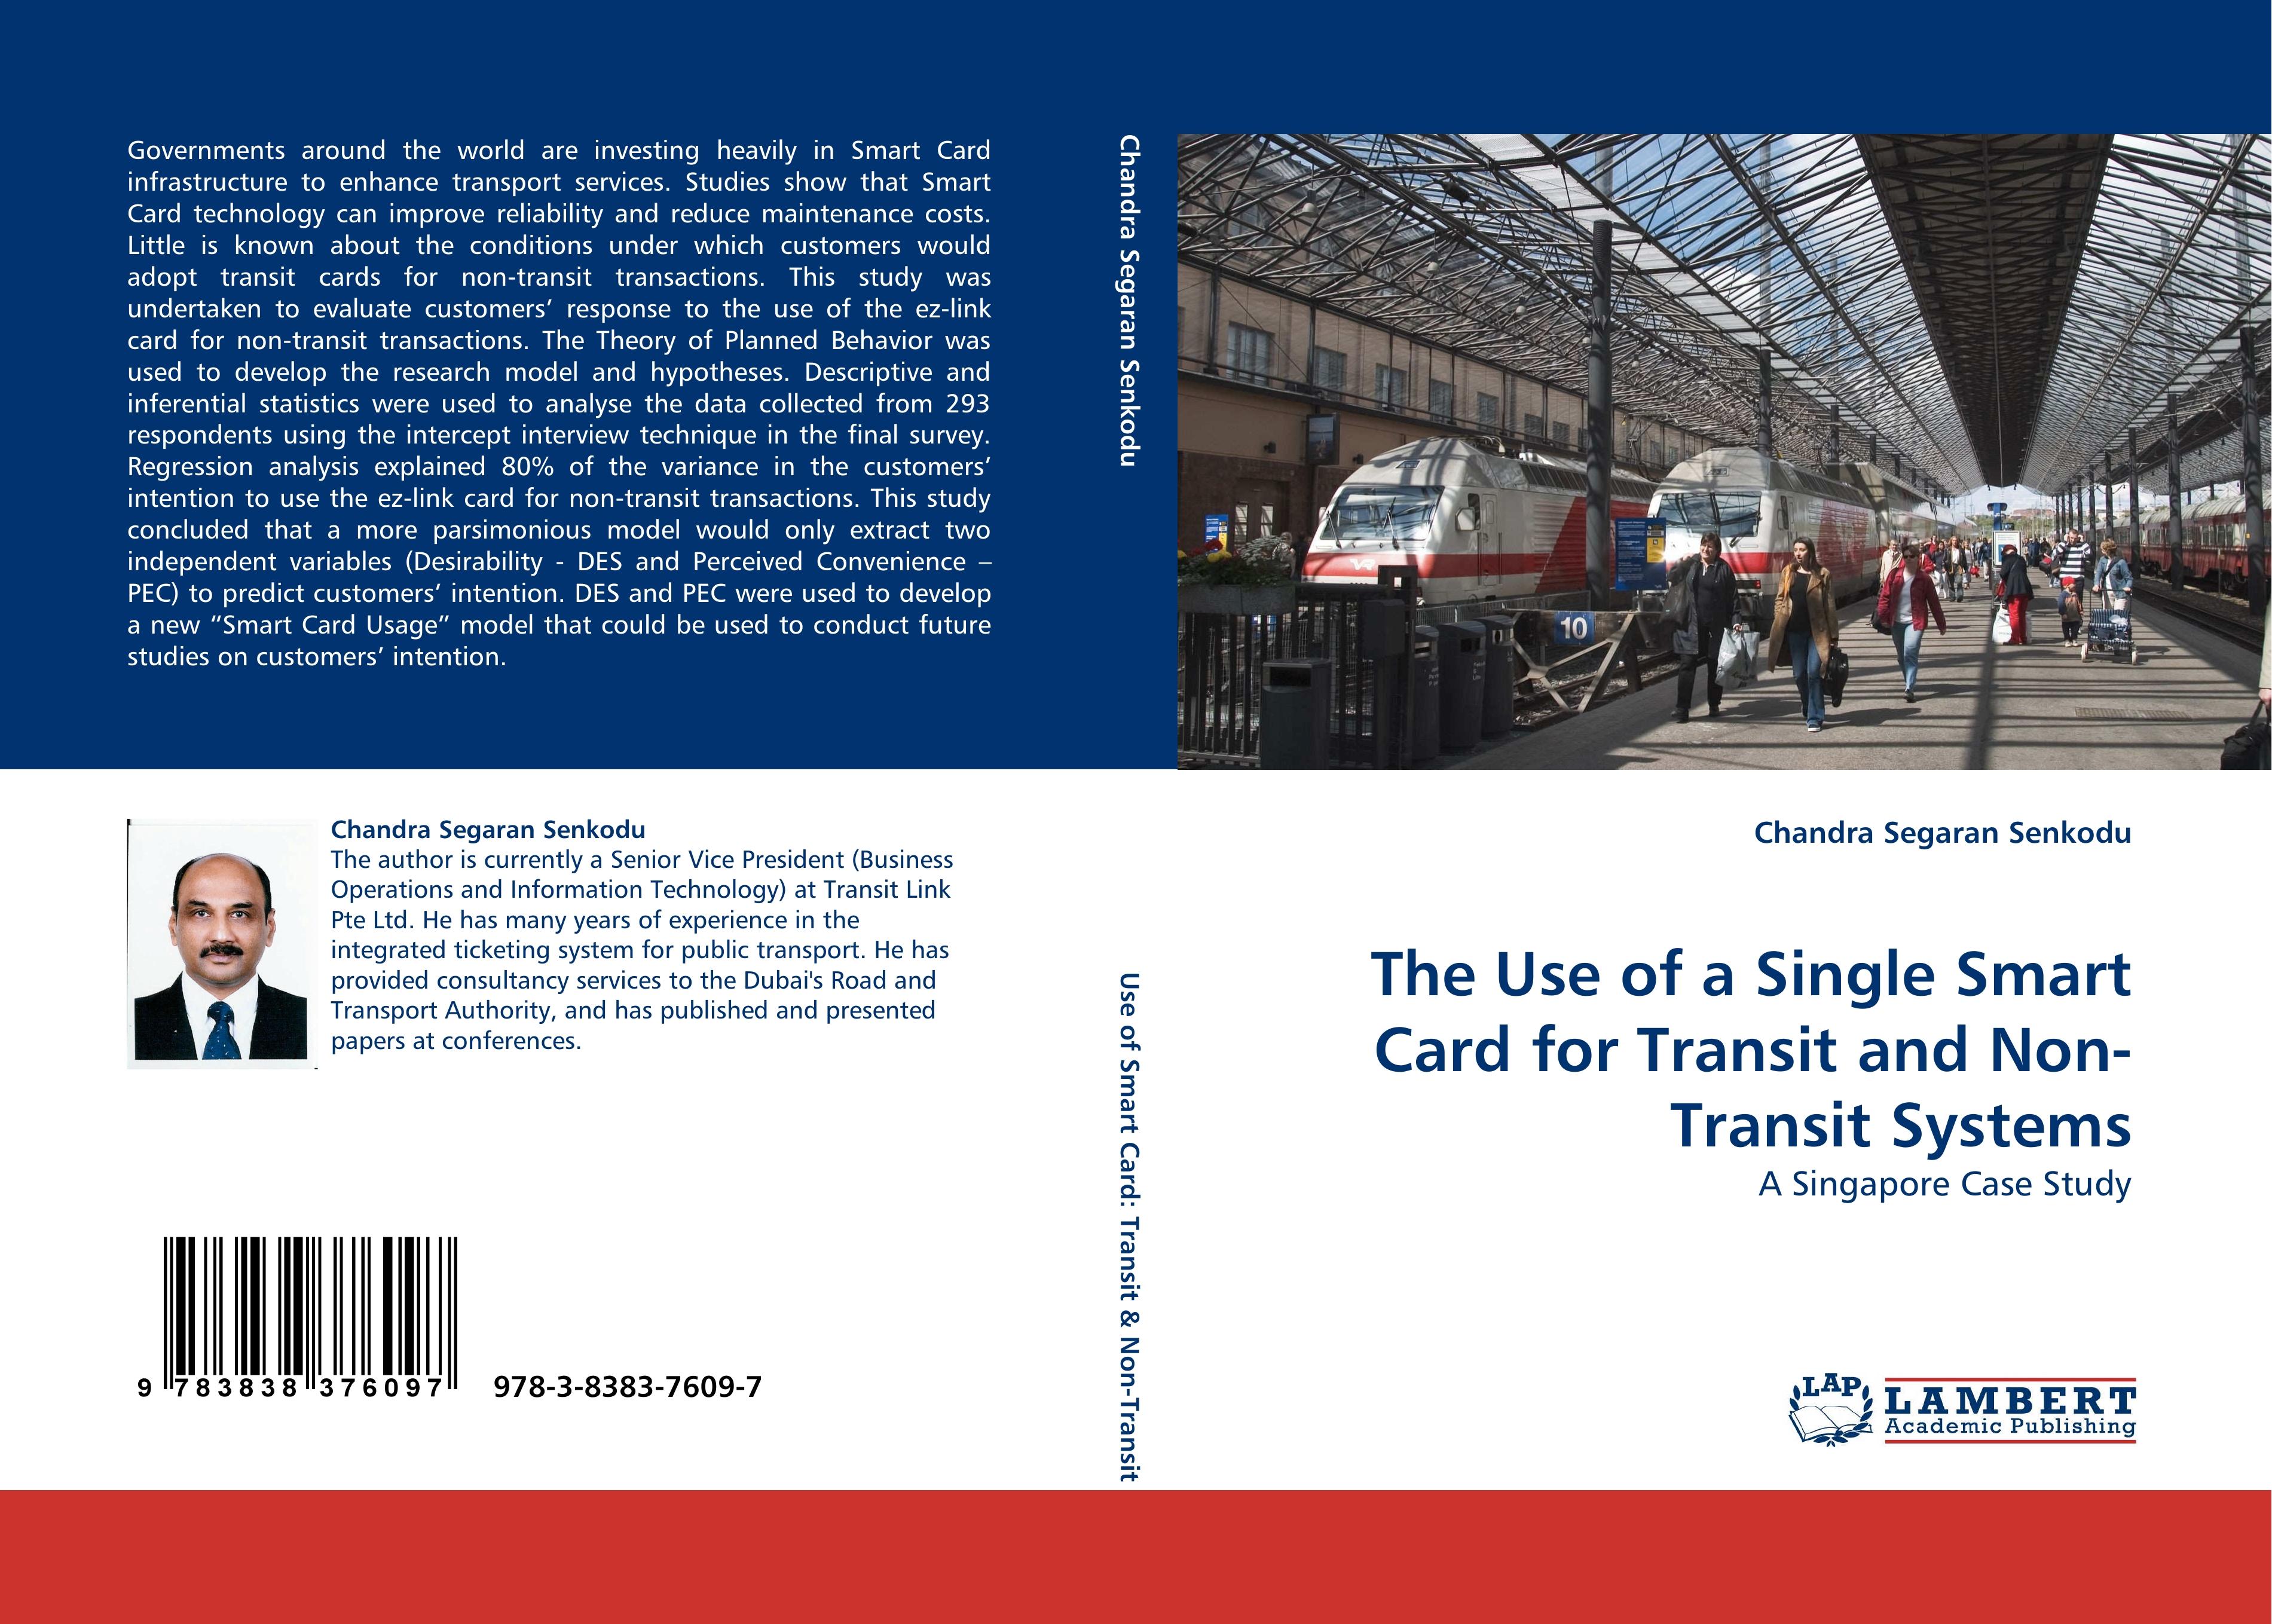 The Use of a Single Smart Card for Transit and Non-Transit Systems / A SINGAPORE CASE STUDY / Chandra Segaran Senkodu / Taschenbuch / Paperback / 196 S. / Englisch / 2010 / EAN 9783838376097 - Senkodu, Chandra Segaran